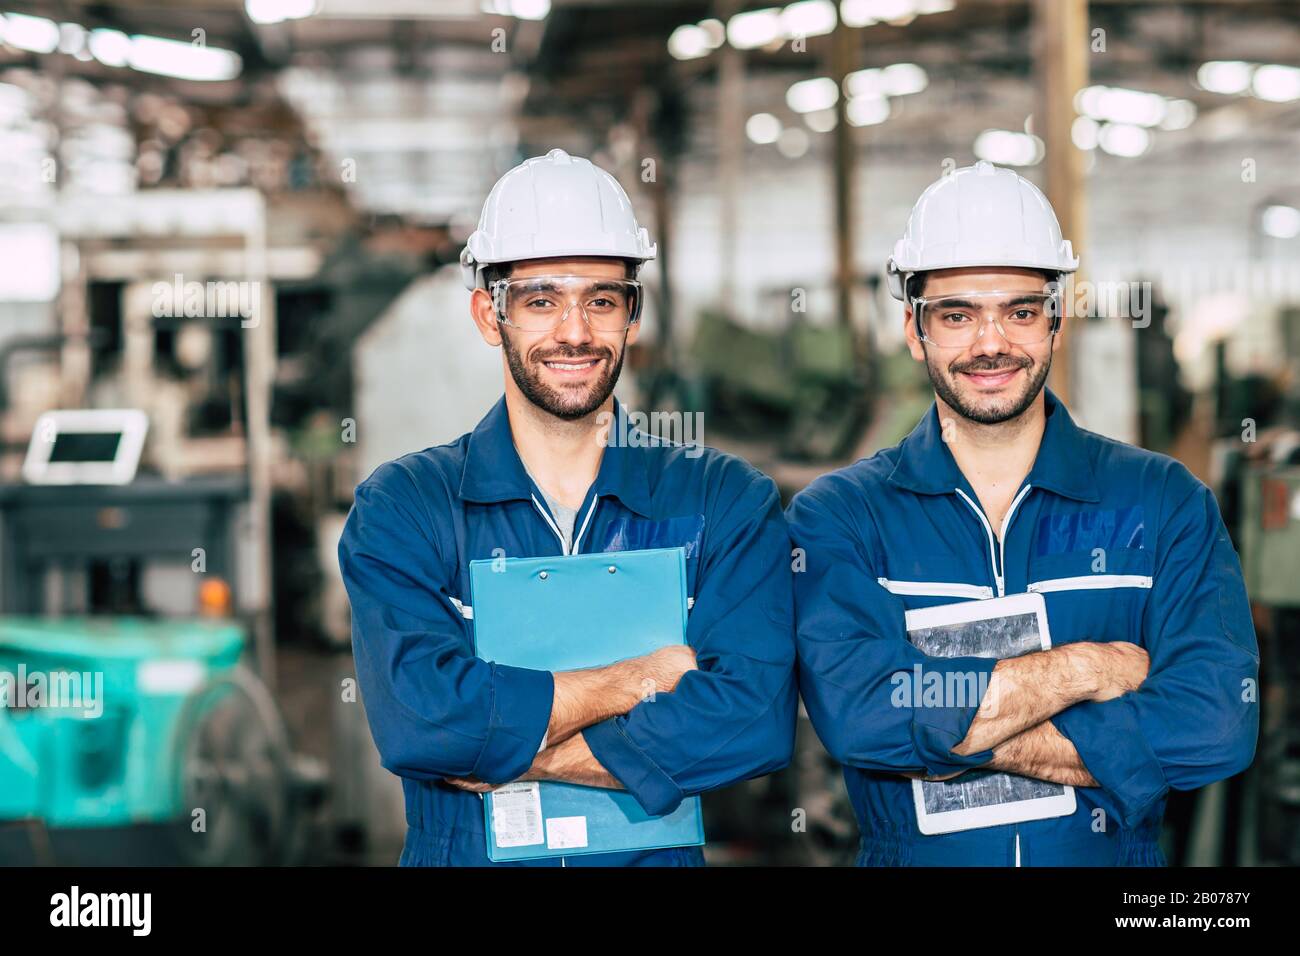 Portrait of Happy Engineer team smiling worker working together in industry factory. Stock Photo